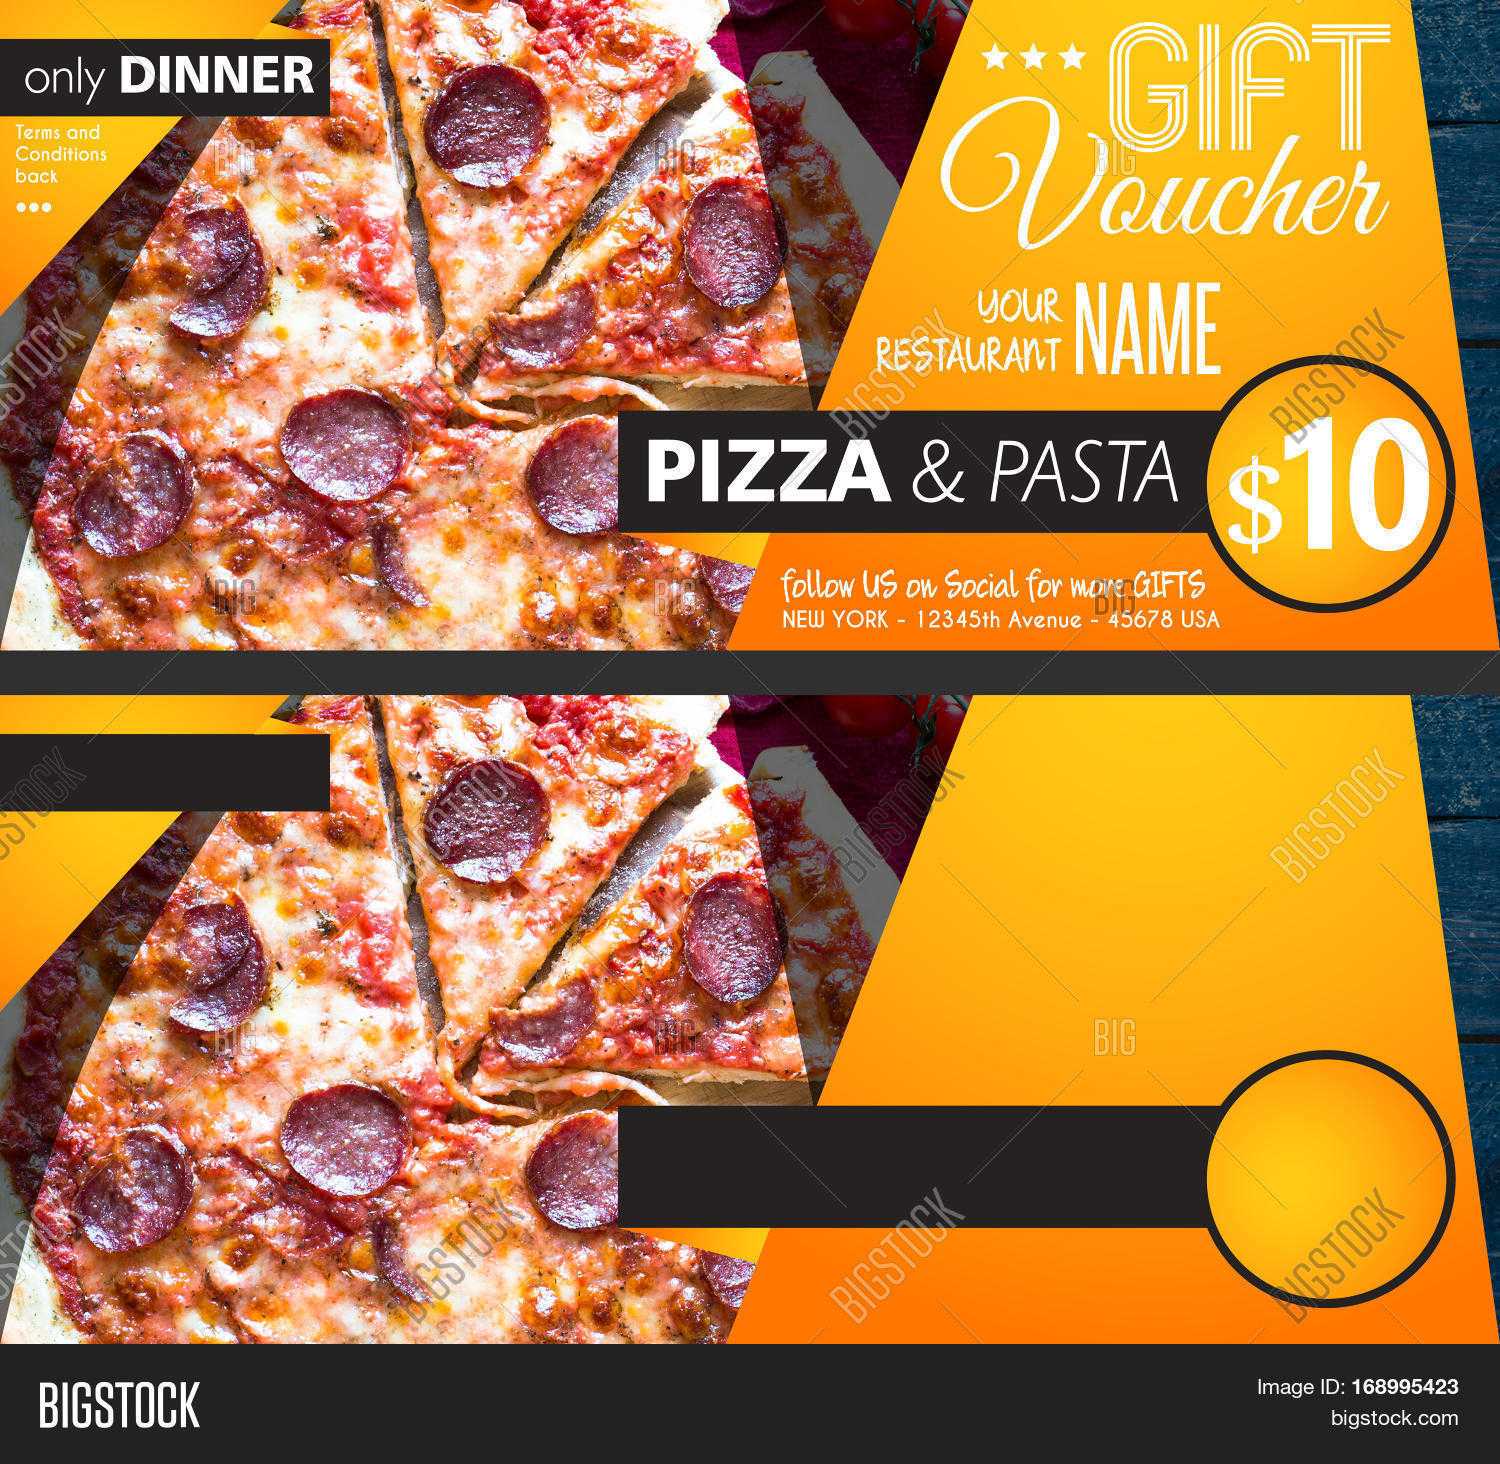 Restaurant Gift Image & Photo (Free Trial) | Bigstock Pertaining To Pizza Gift Certificate Template